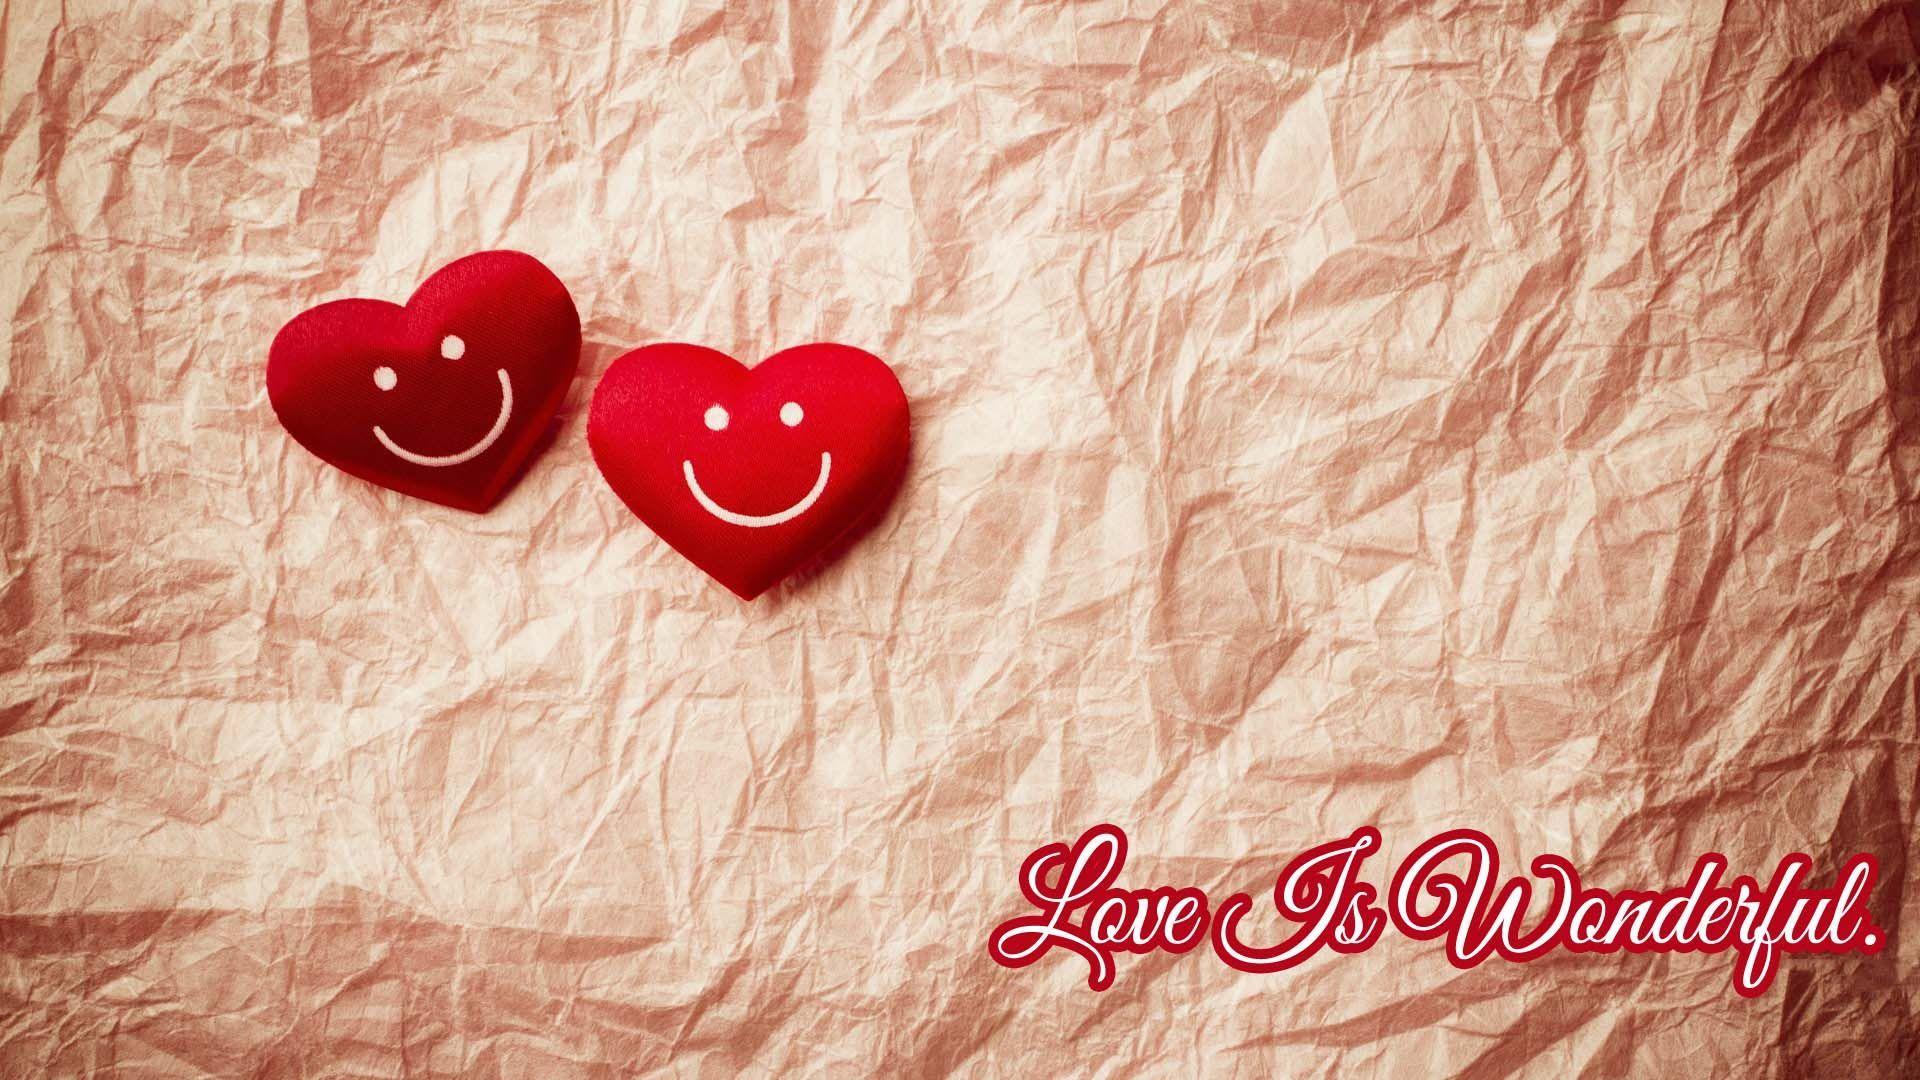 Cute I Love You. HD Love Wallpaper for Mobile and Desktop